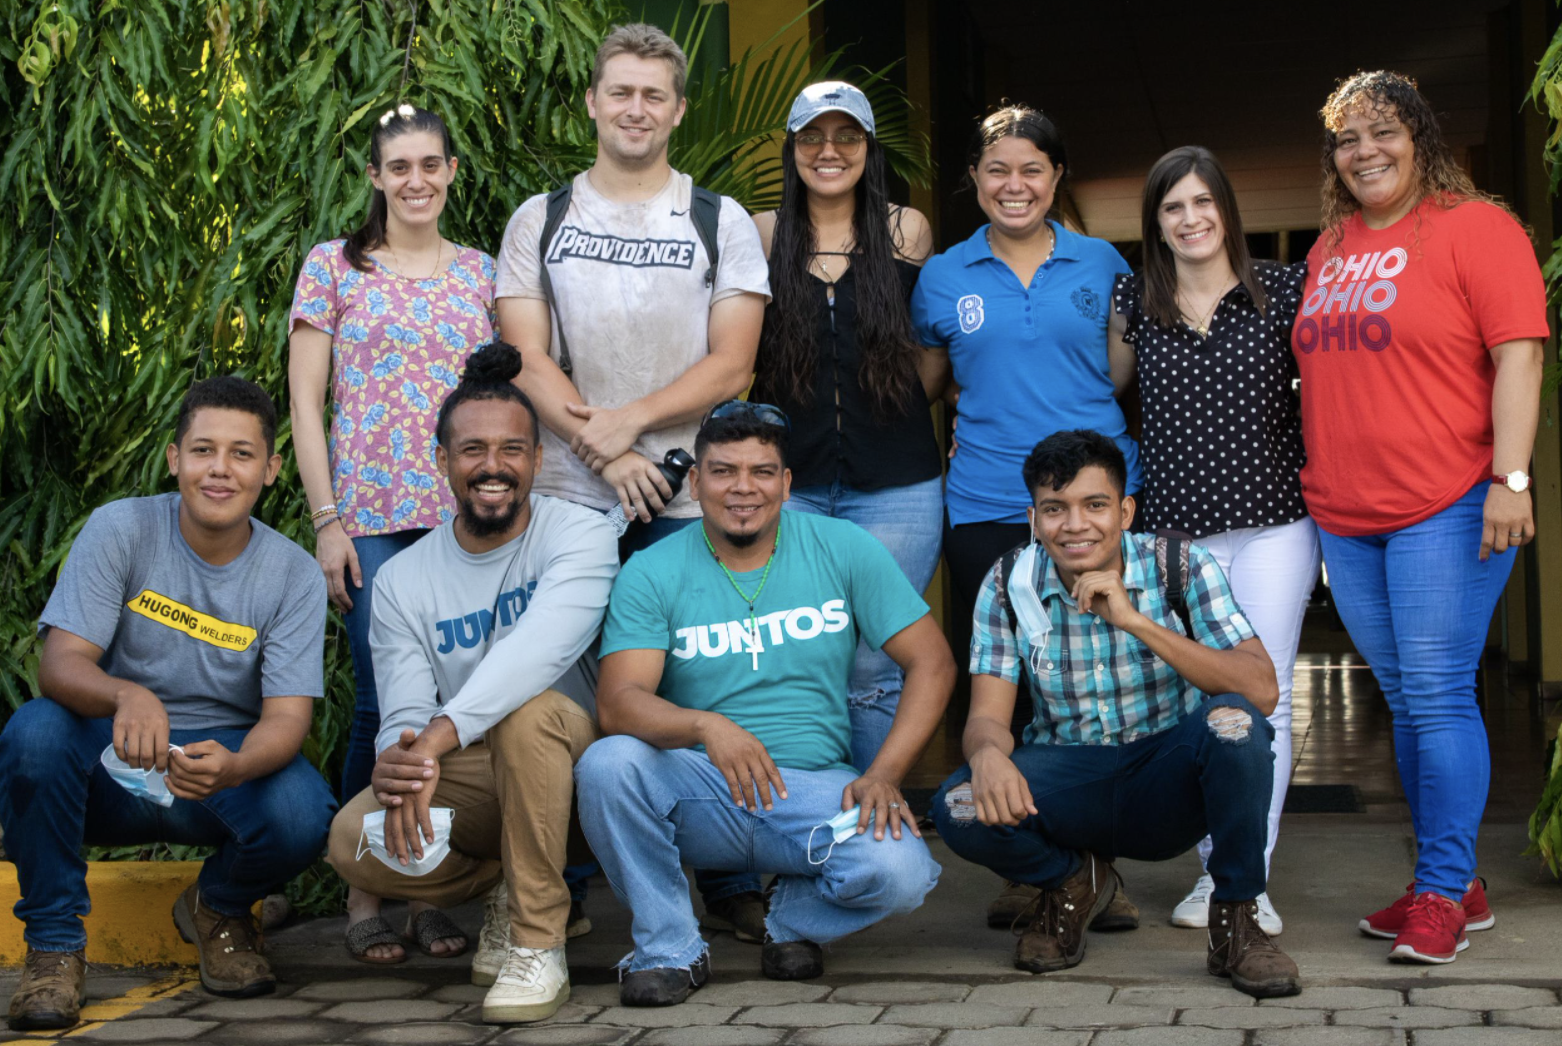 The Partnerships Team is committed to facilitating the best mission trip experience for all who come to serve with us. This team carefully plans in-country travel logistics, delicious food, comfy accommodations, and most importantly, they coordinate many life-changing connections between mission trip participants and local Nicaraguan families.